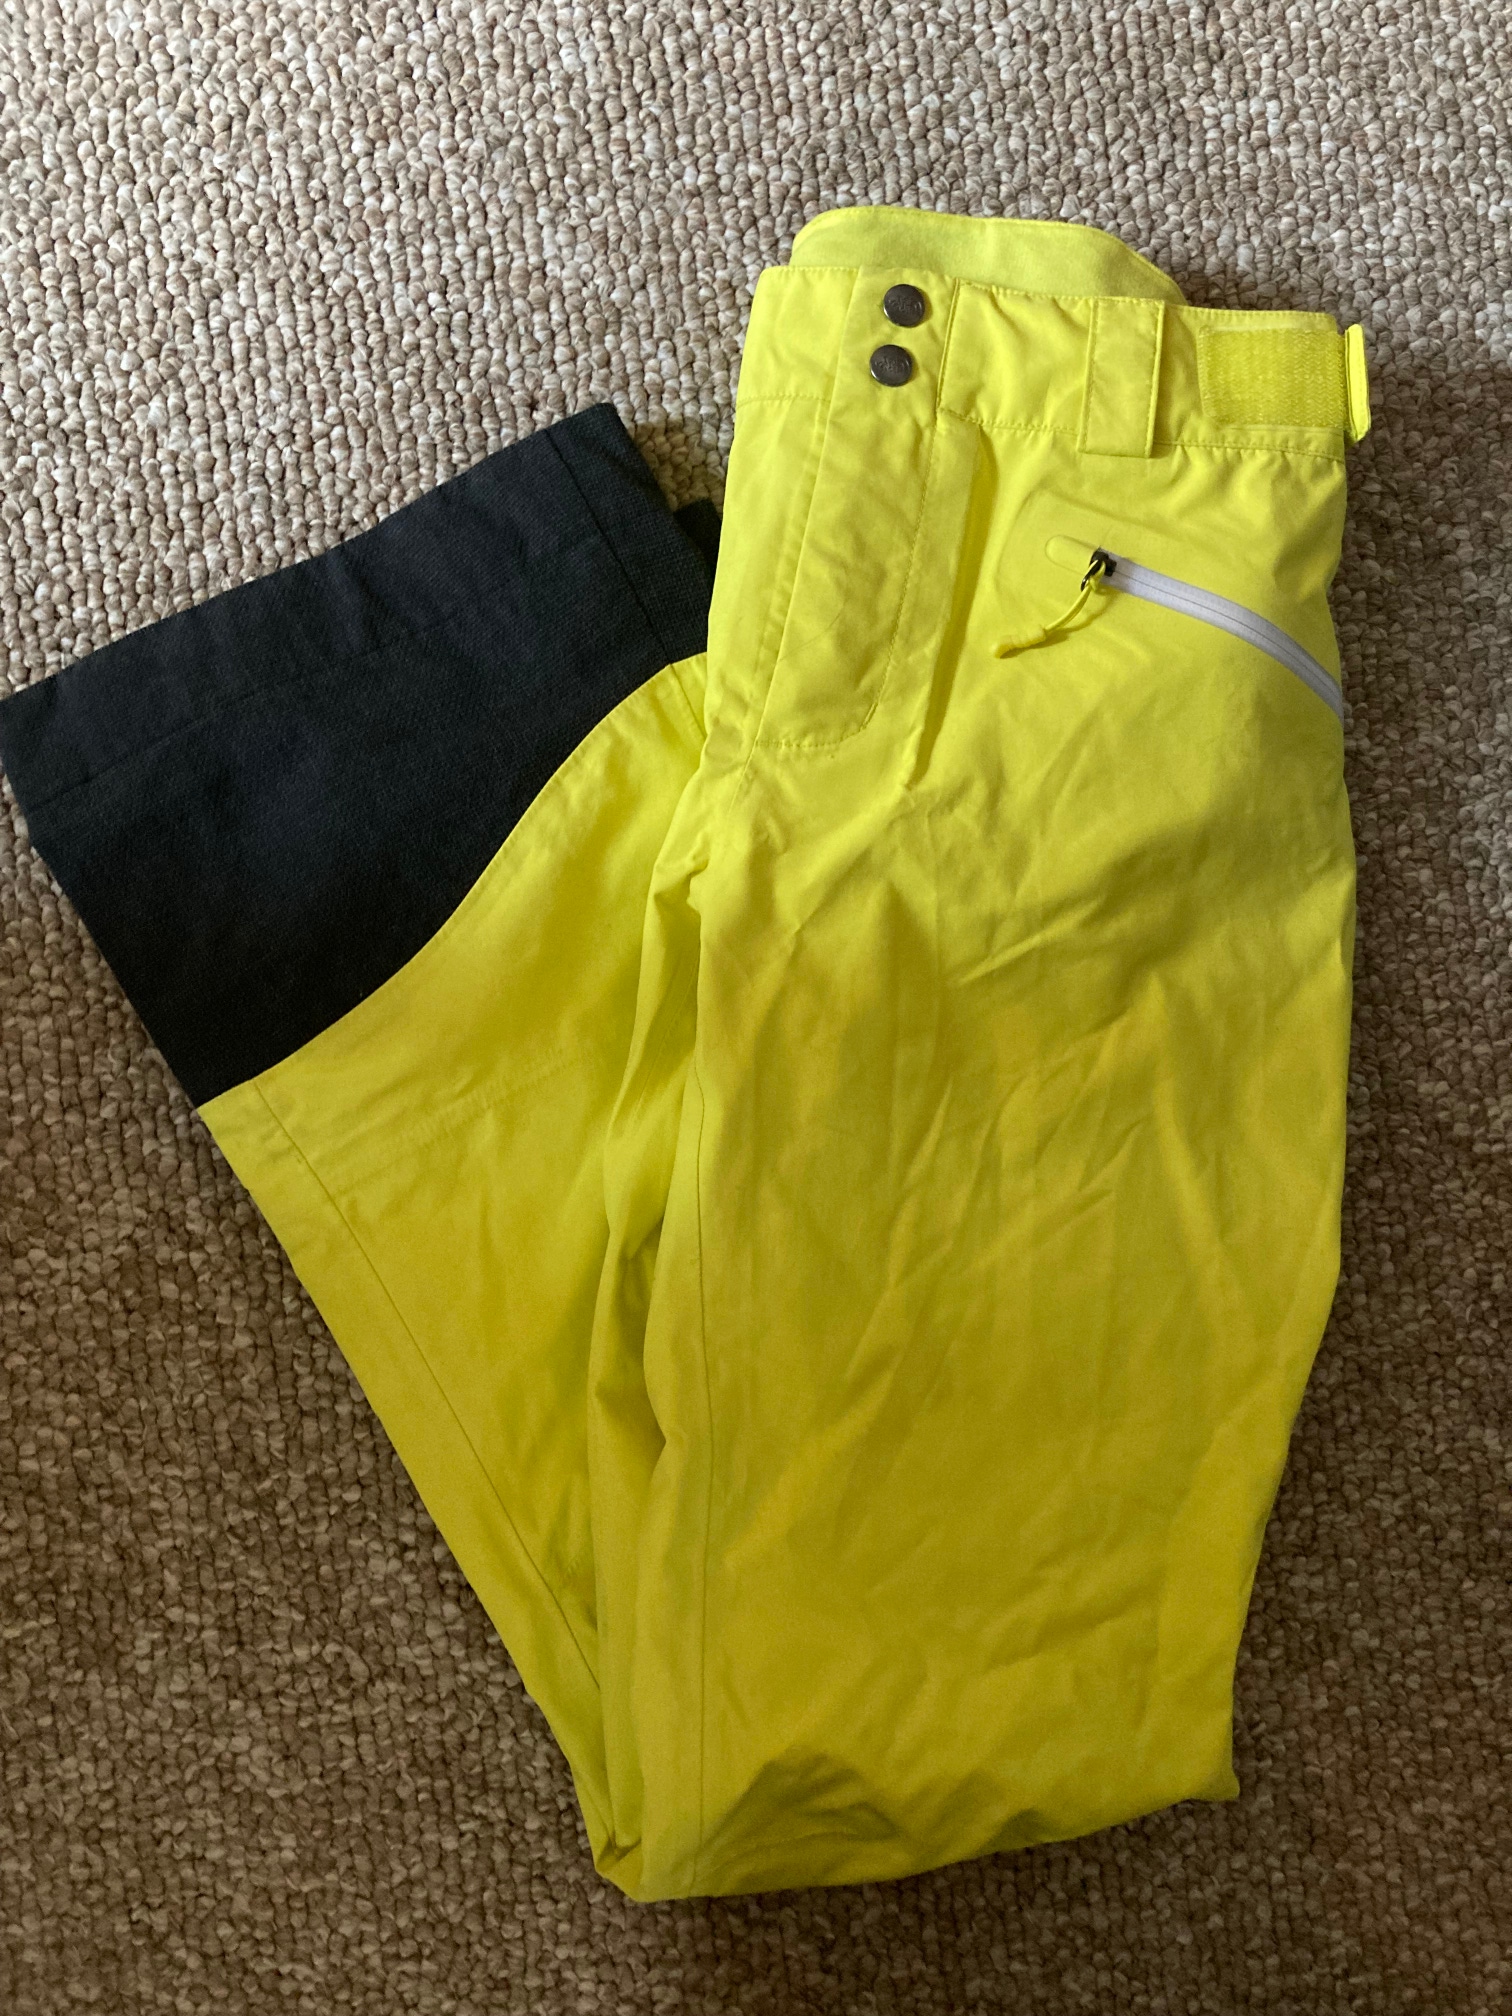 Women's north face Adult Used Small Ski Pants